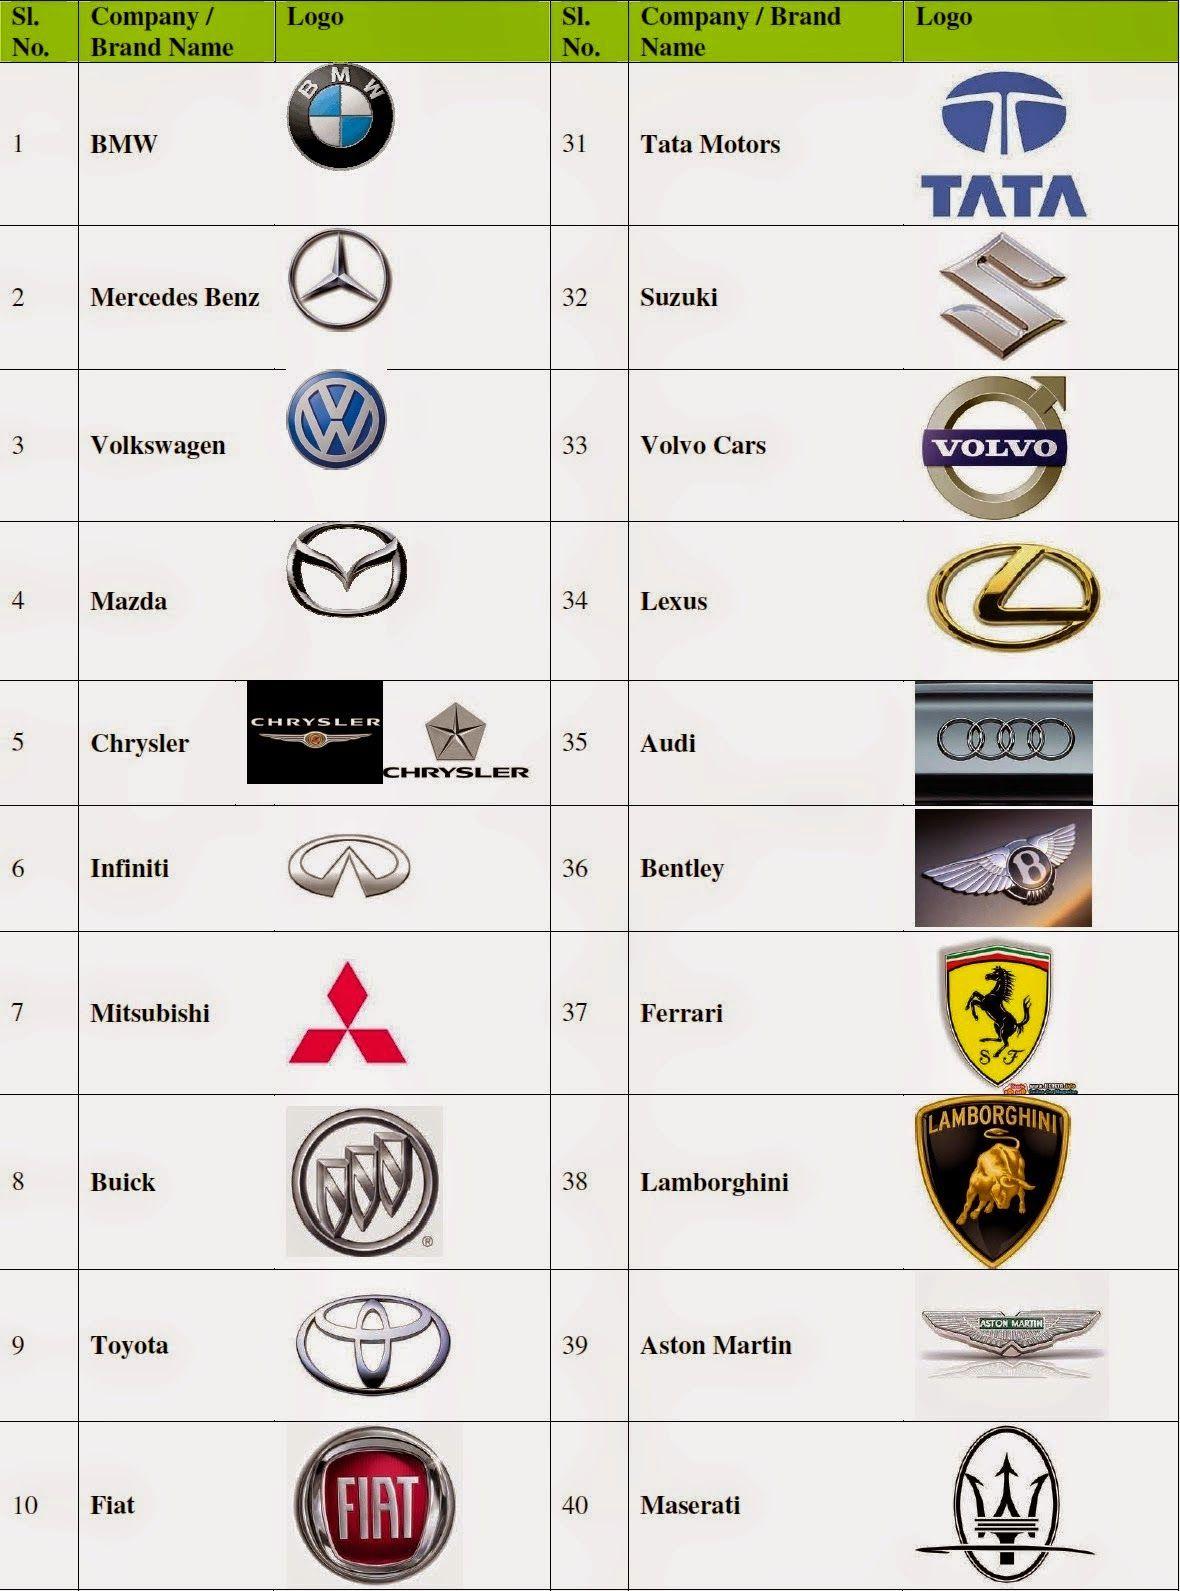 Famous Car Brand Logo - Best Cars Brands and Car Companies: Car Brand Logos of Leading Car